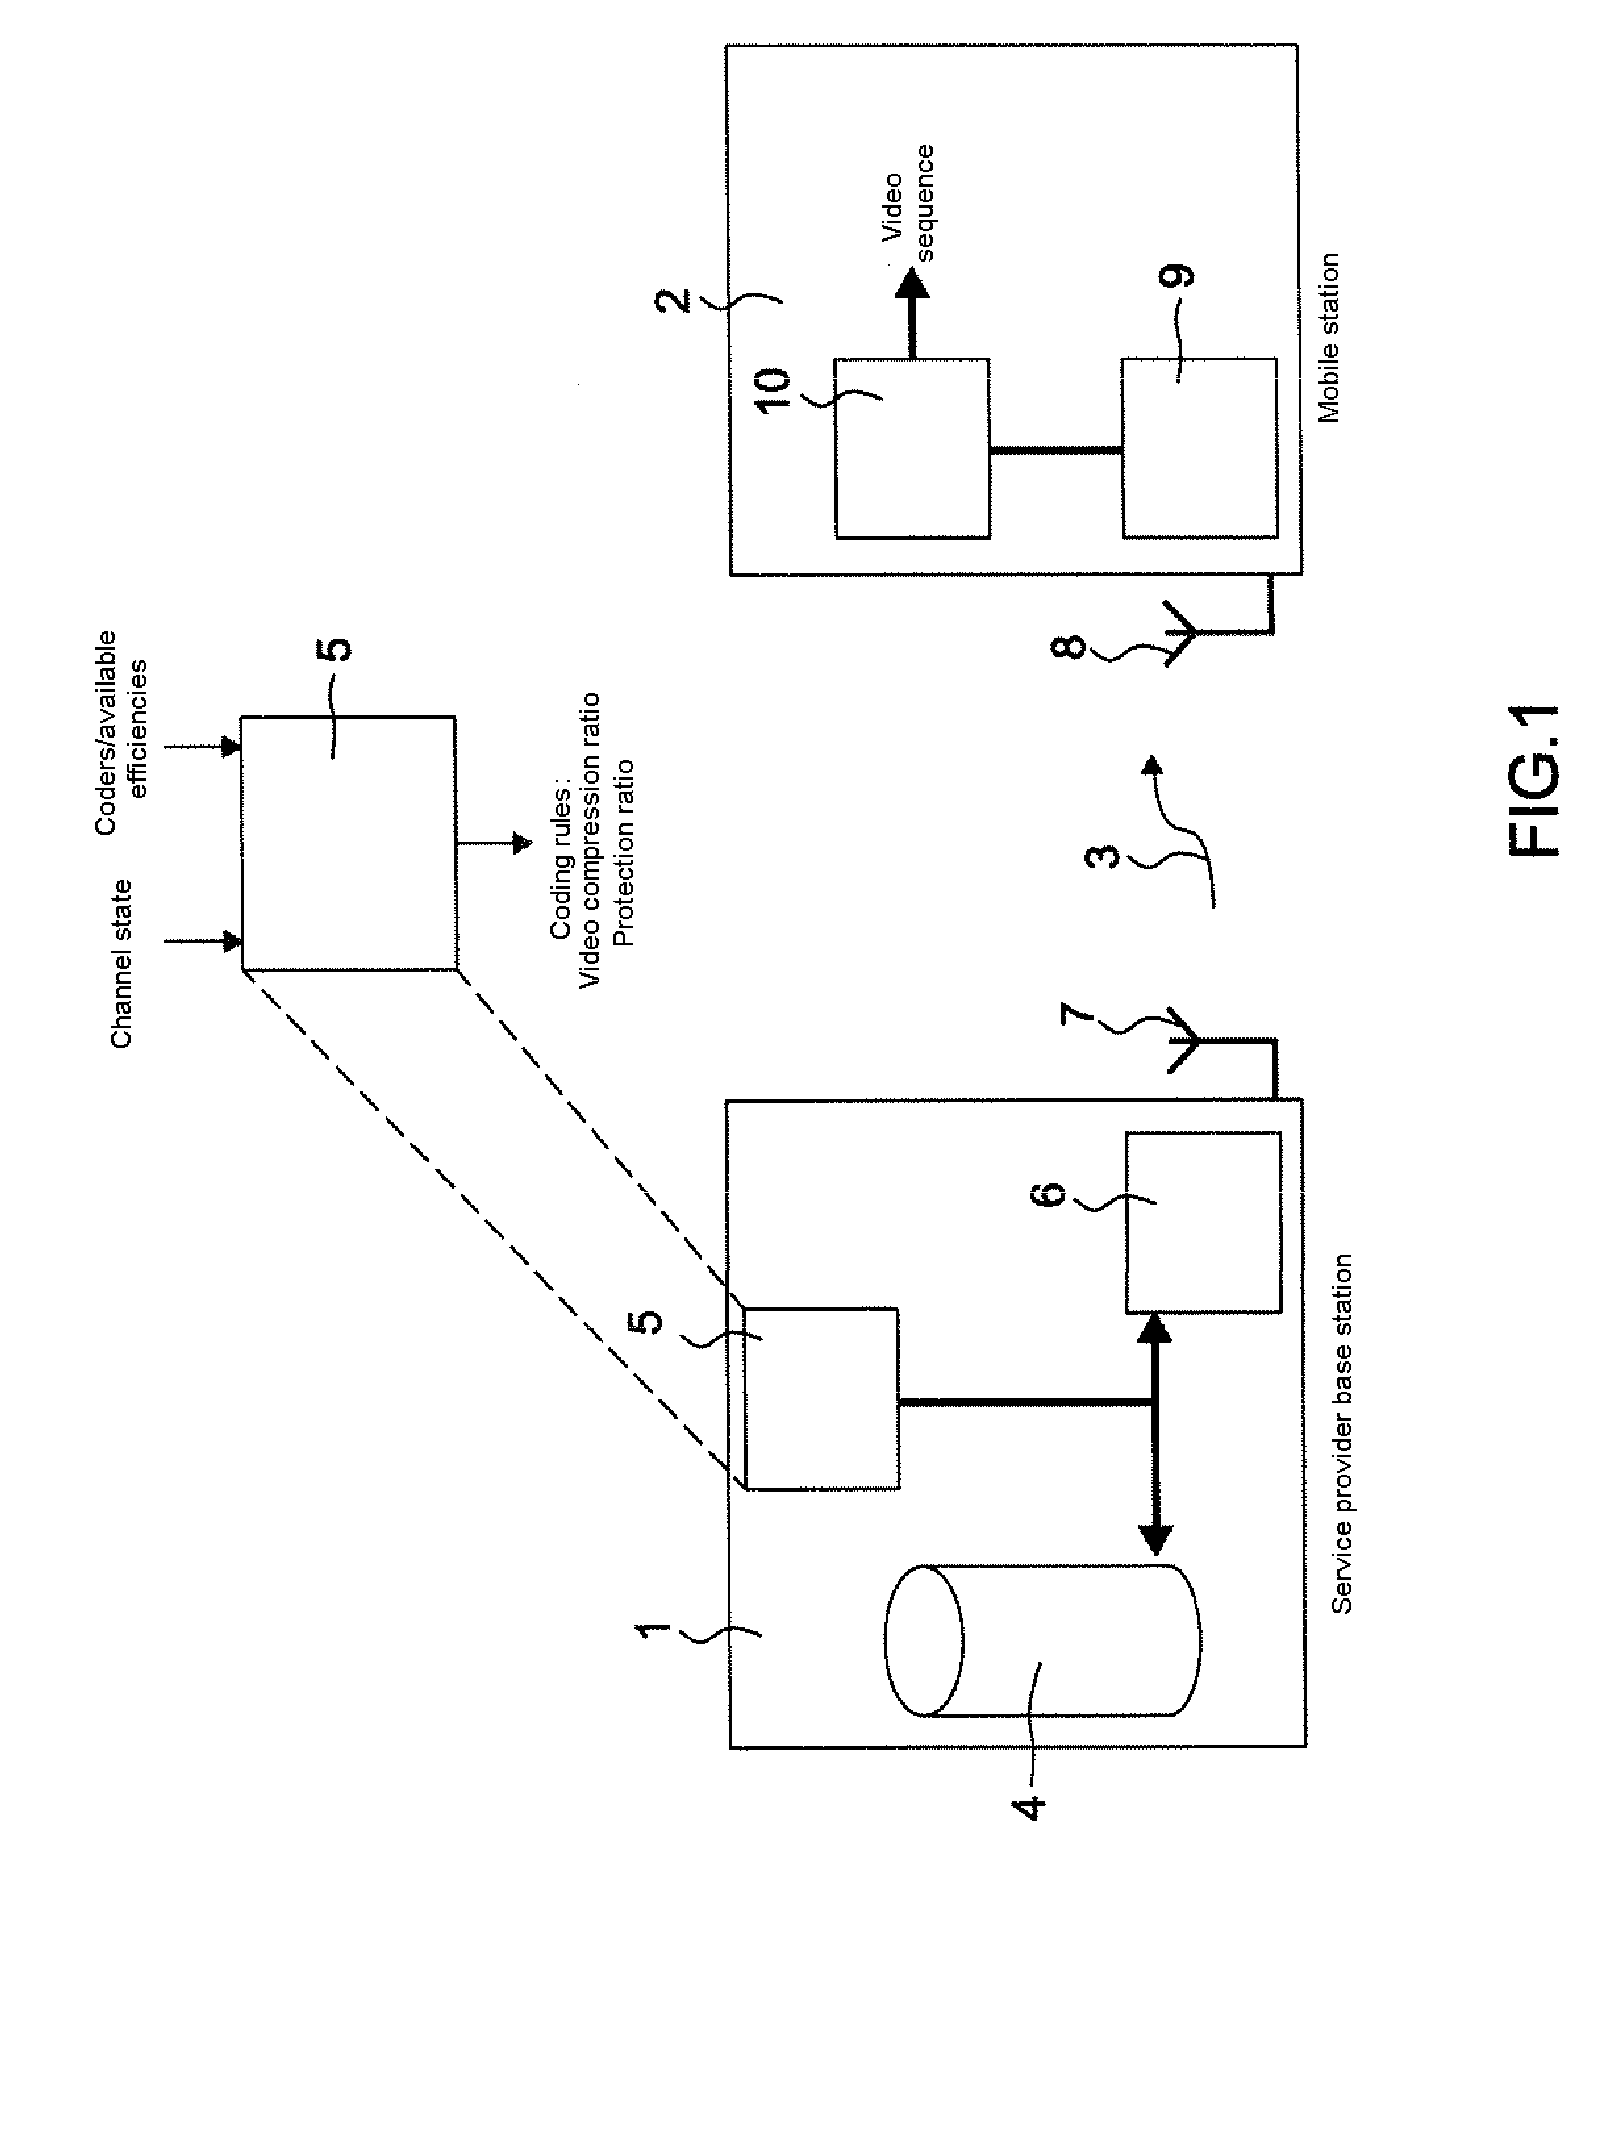 Method allowing compression and protection parameters to be determined for the transmission of multimedia data over a wireless data channel